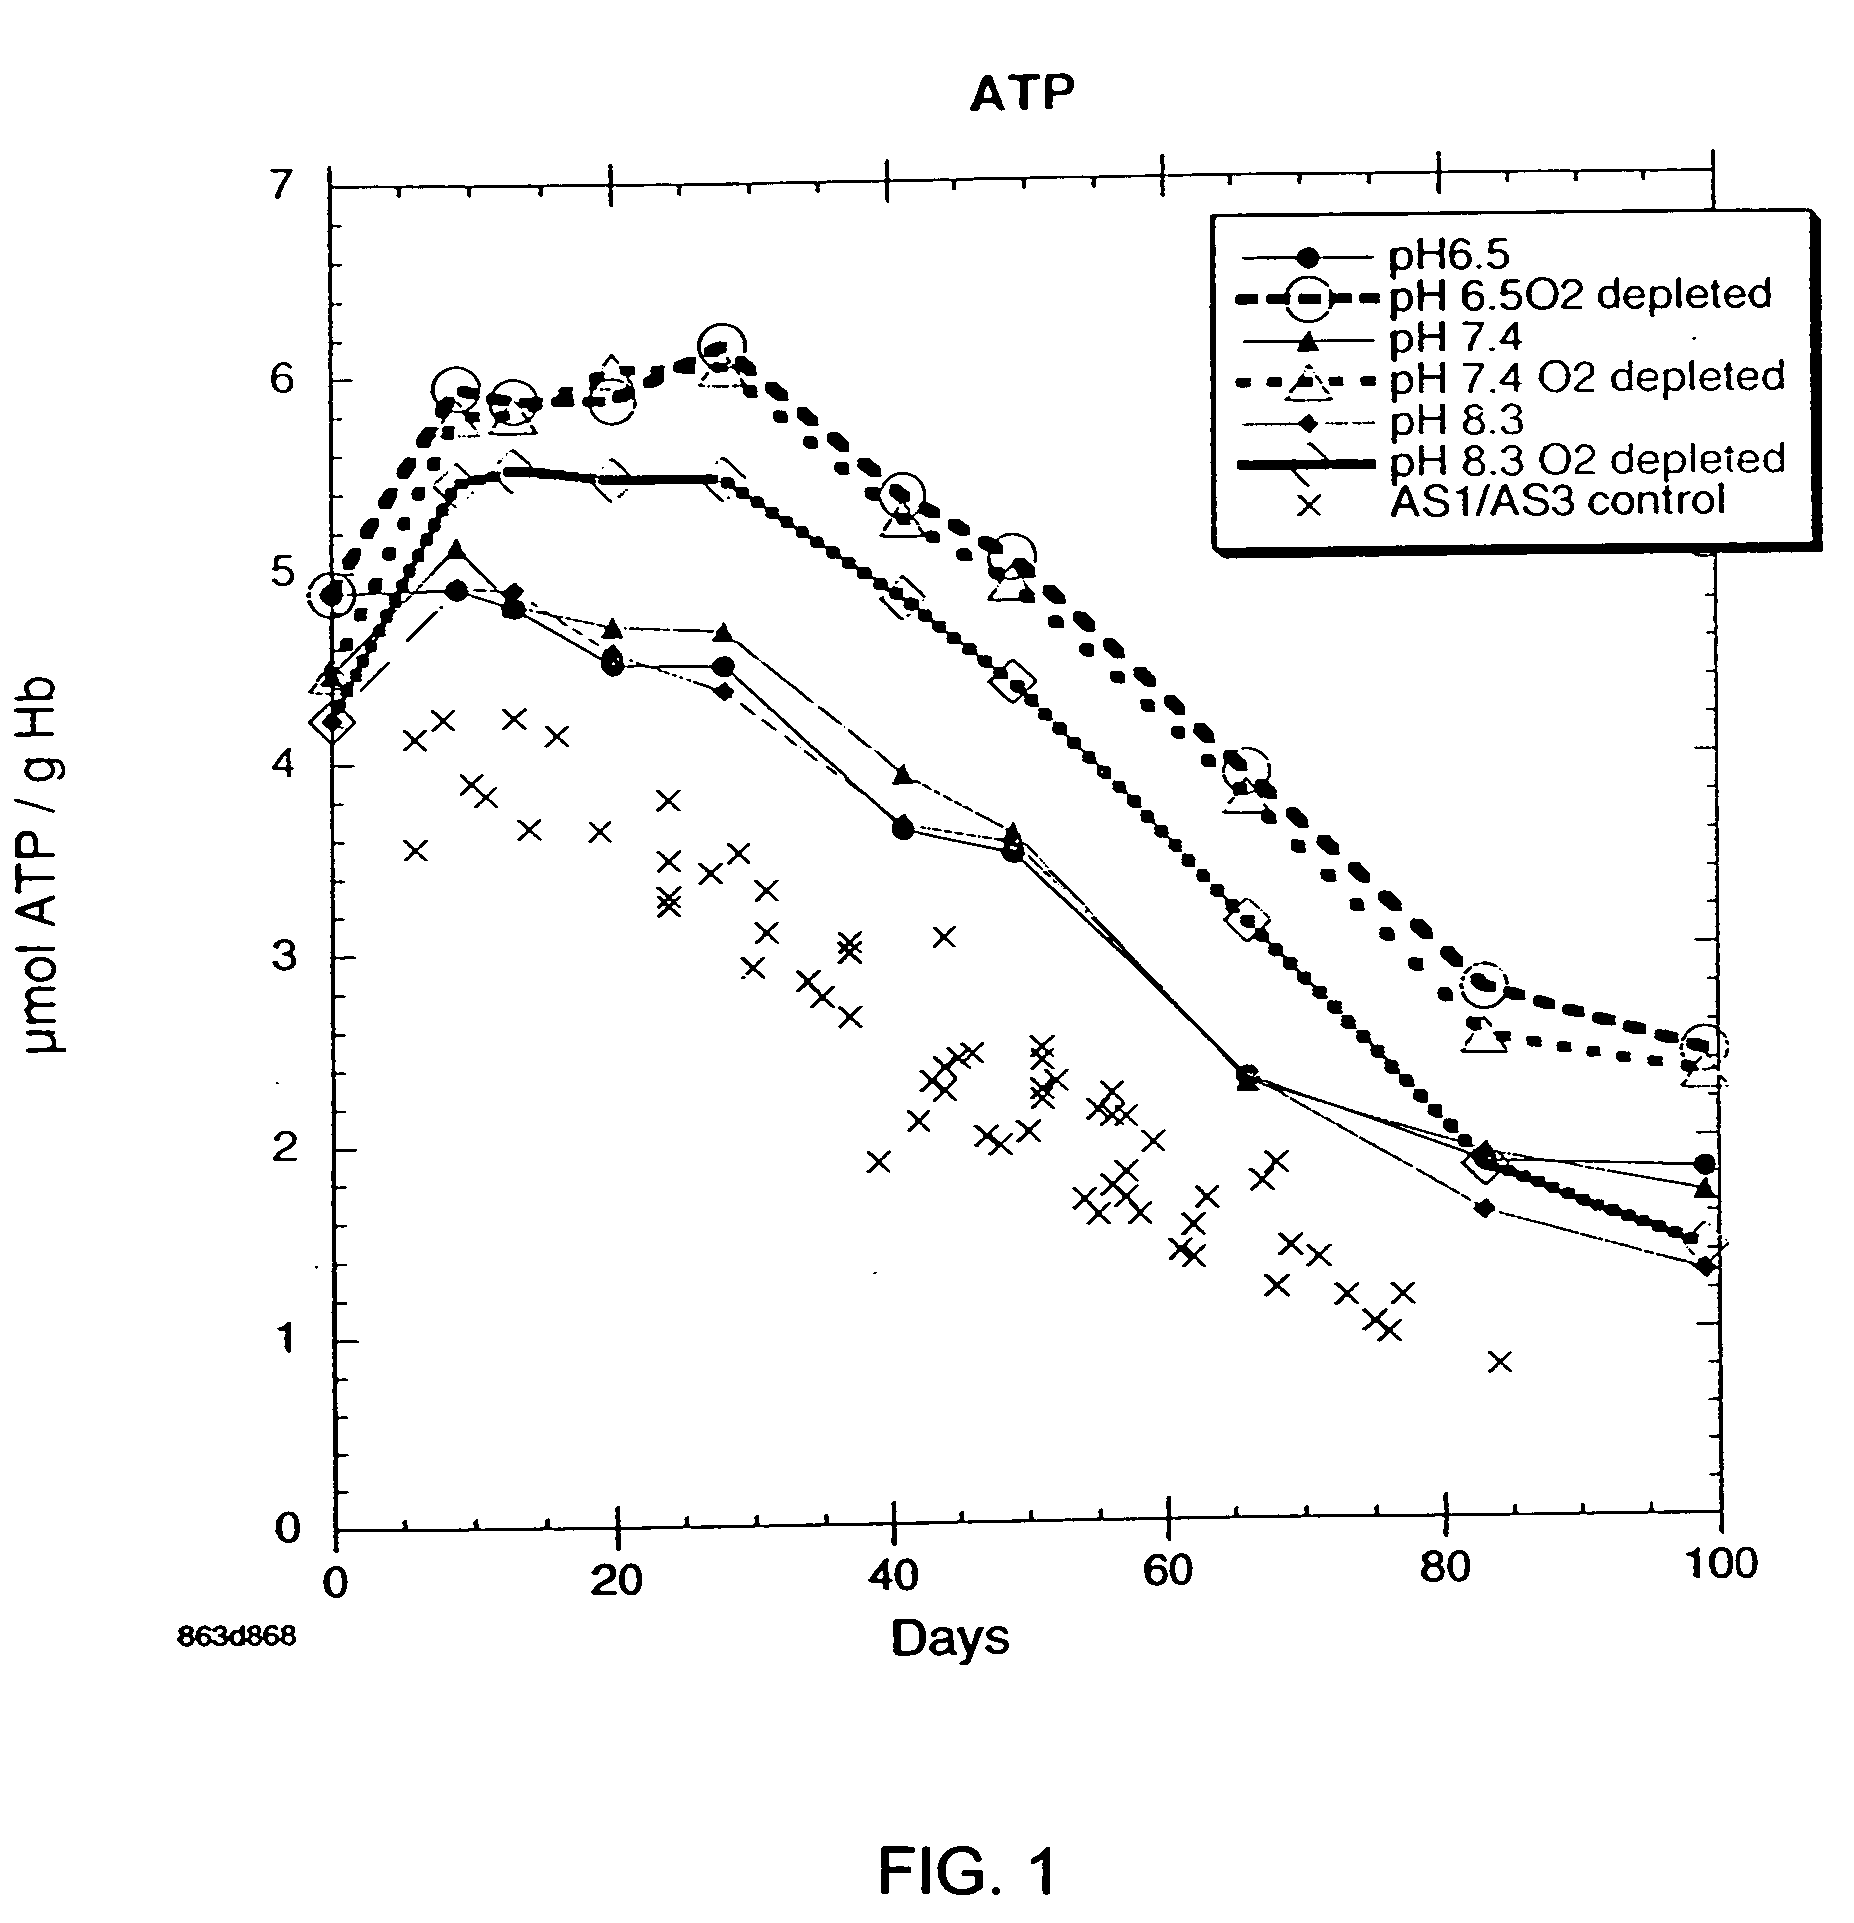 Method for extending the useful shelf-life of refrigerated red blood cells by nutrient supplementation